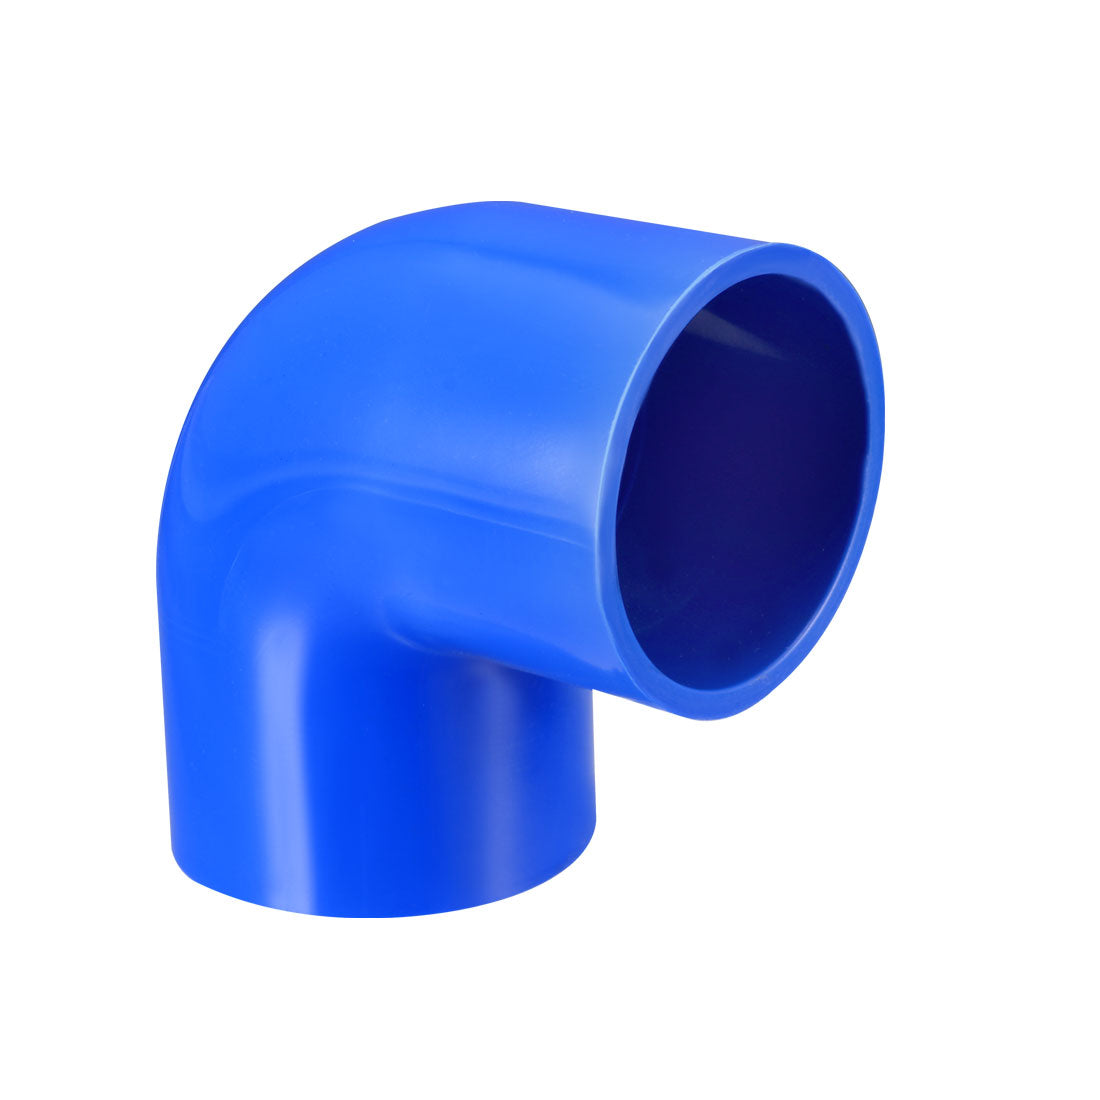 uxcell Uxcell 40mm Slip 90 Degree PVC Pipe Fitting Elbow Coupling Adapter Blue 2 Pcs